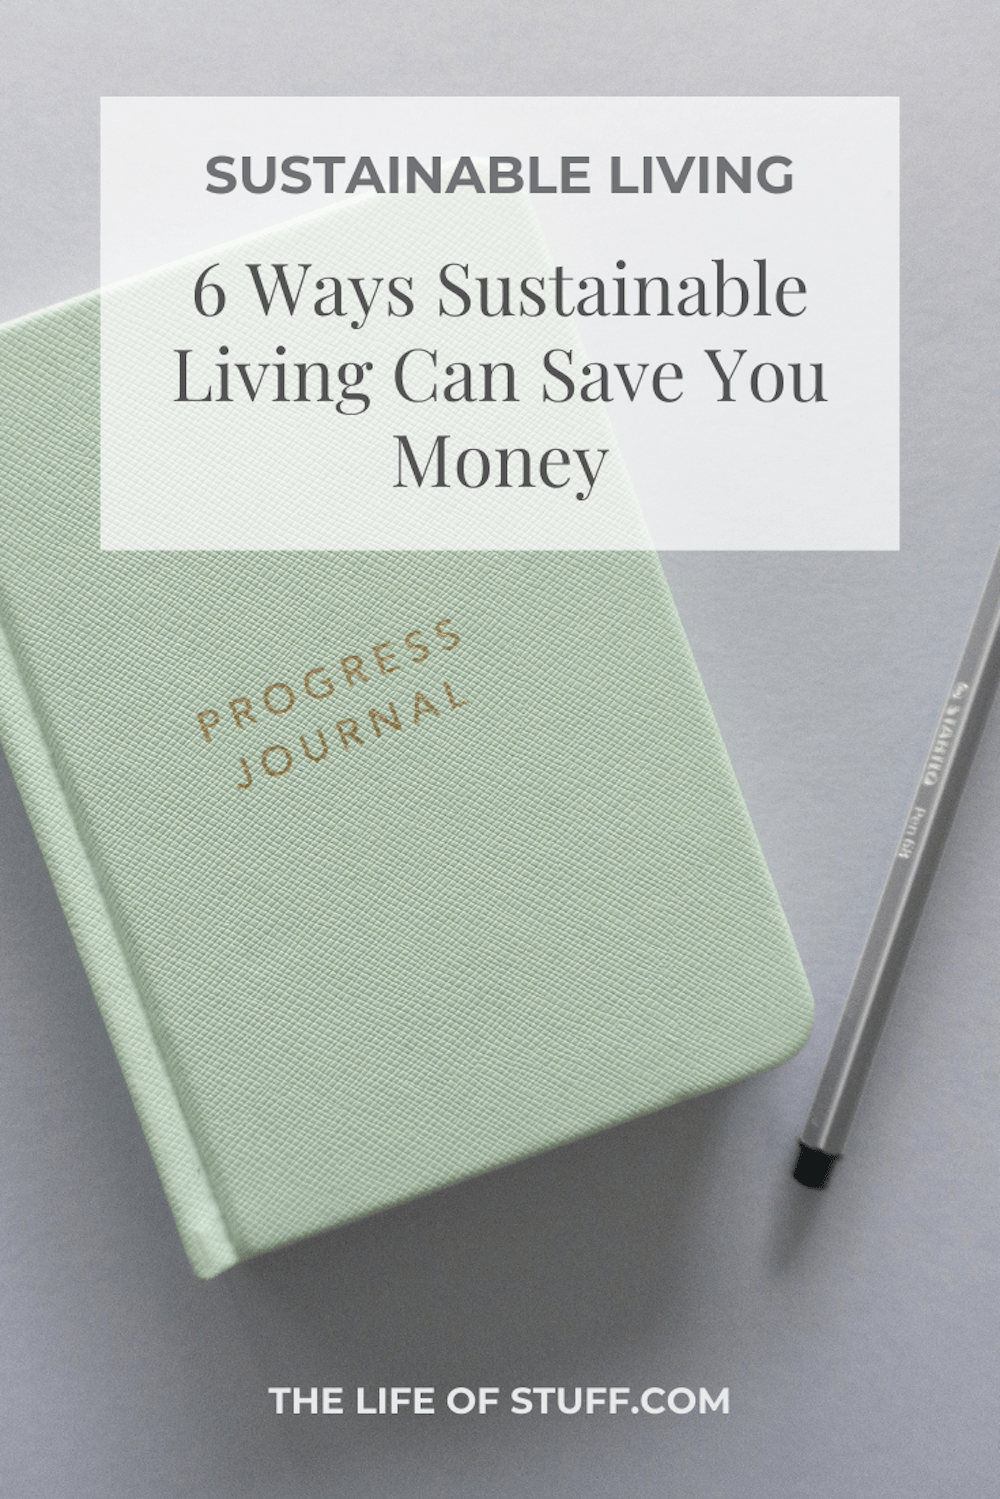 Ways Sustainable Living Can Save You Money - The Life of Stuff